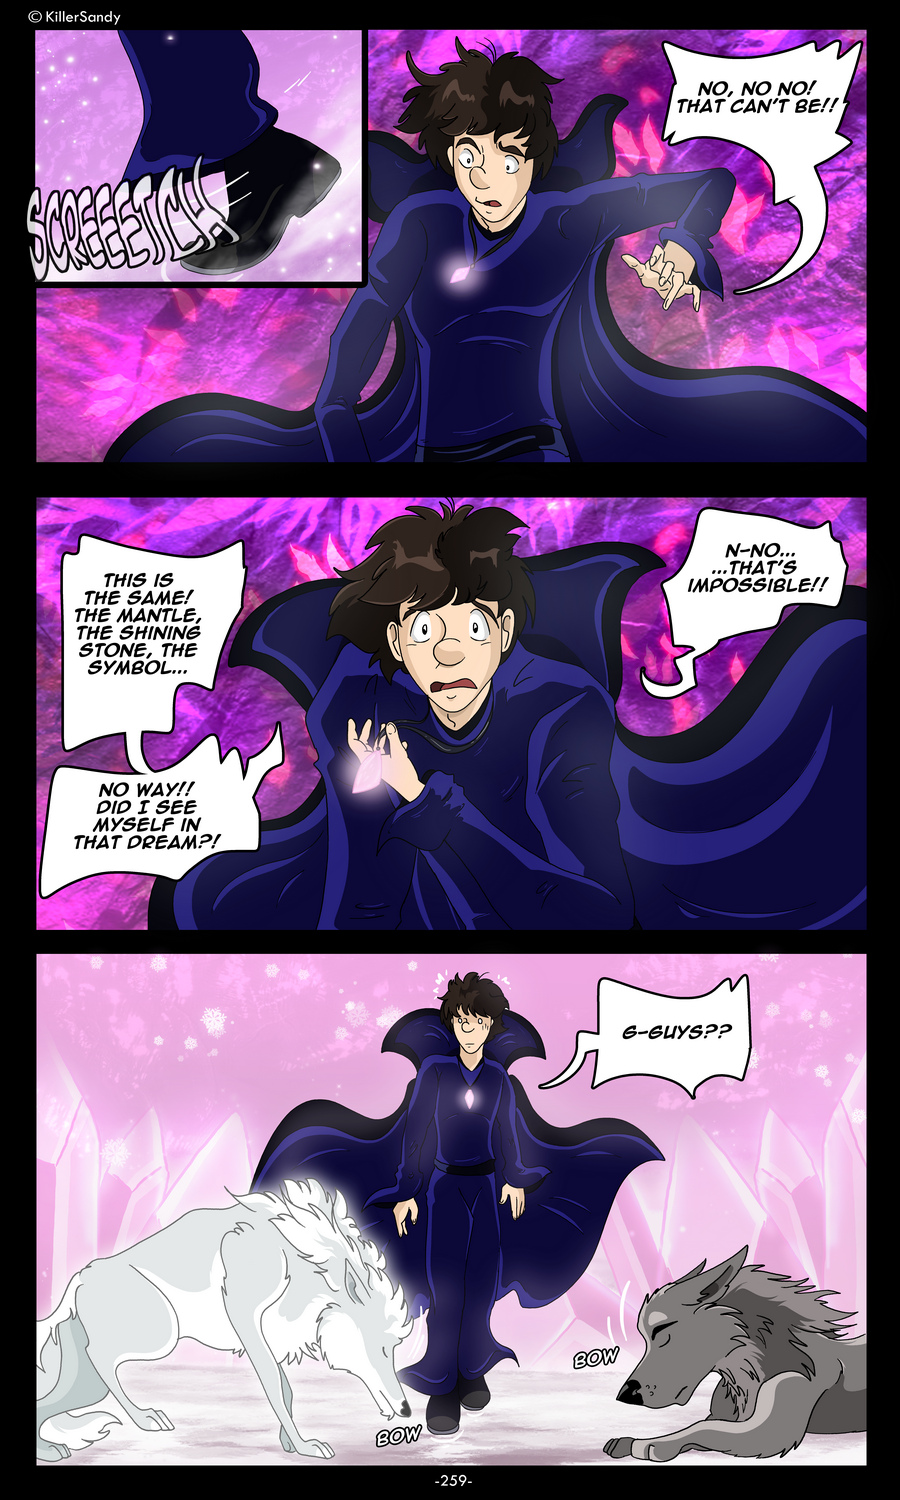 The Prince of the Moonlight Stone page 259